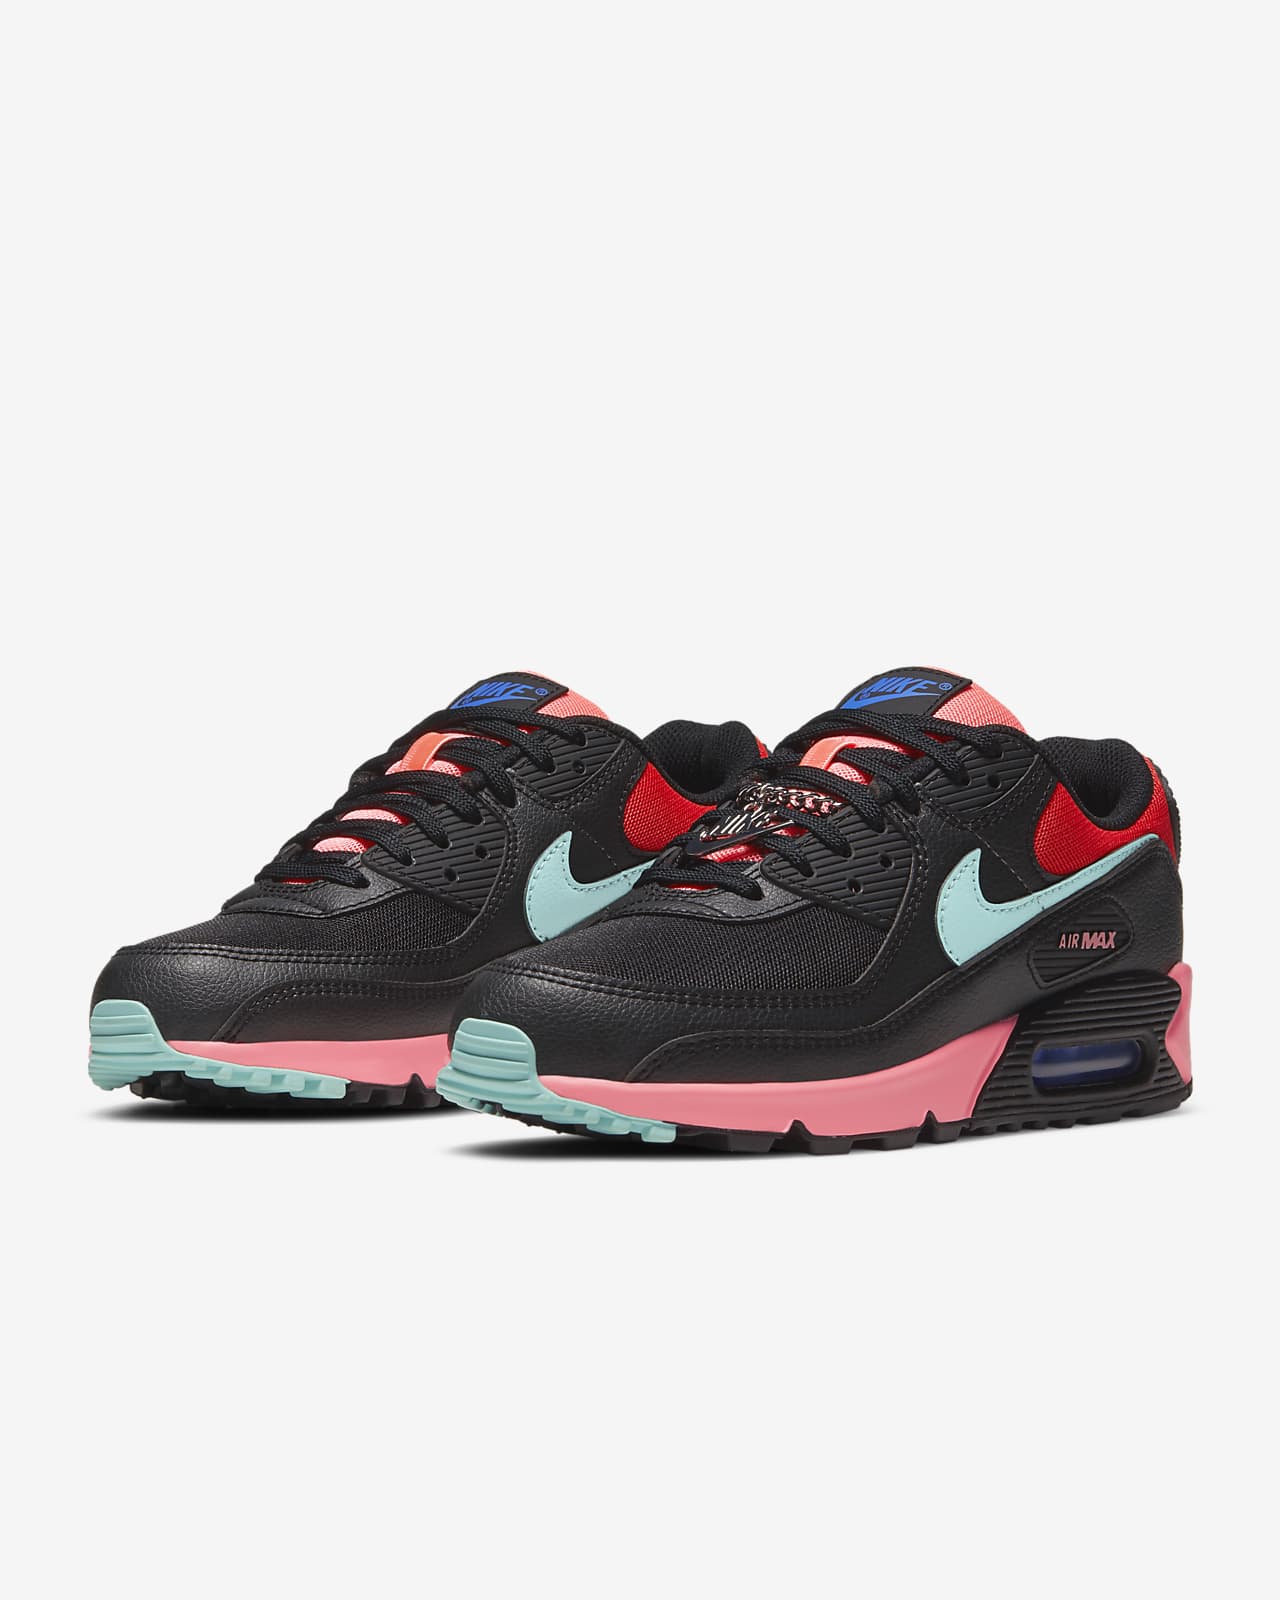 red and black nike air max womens